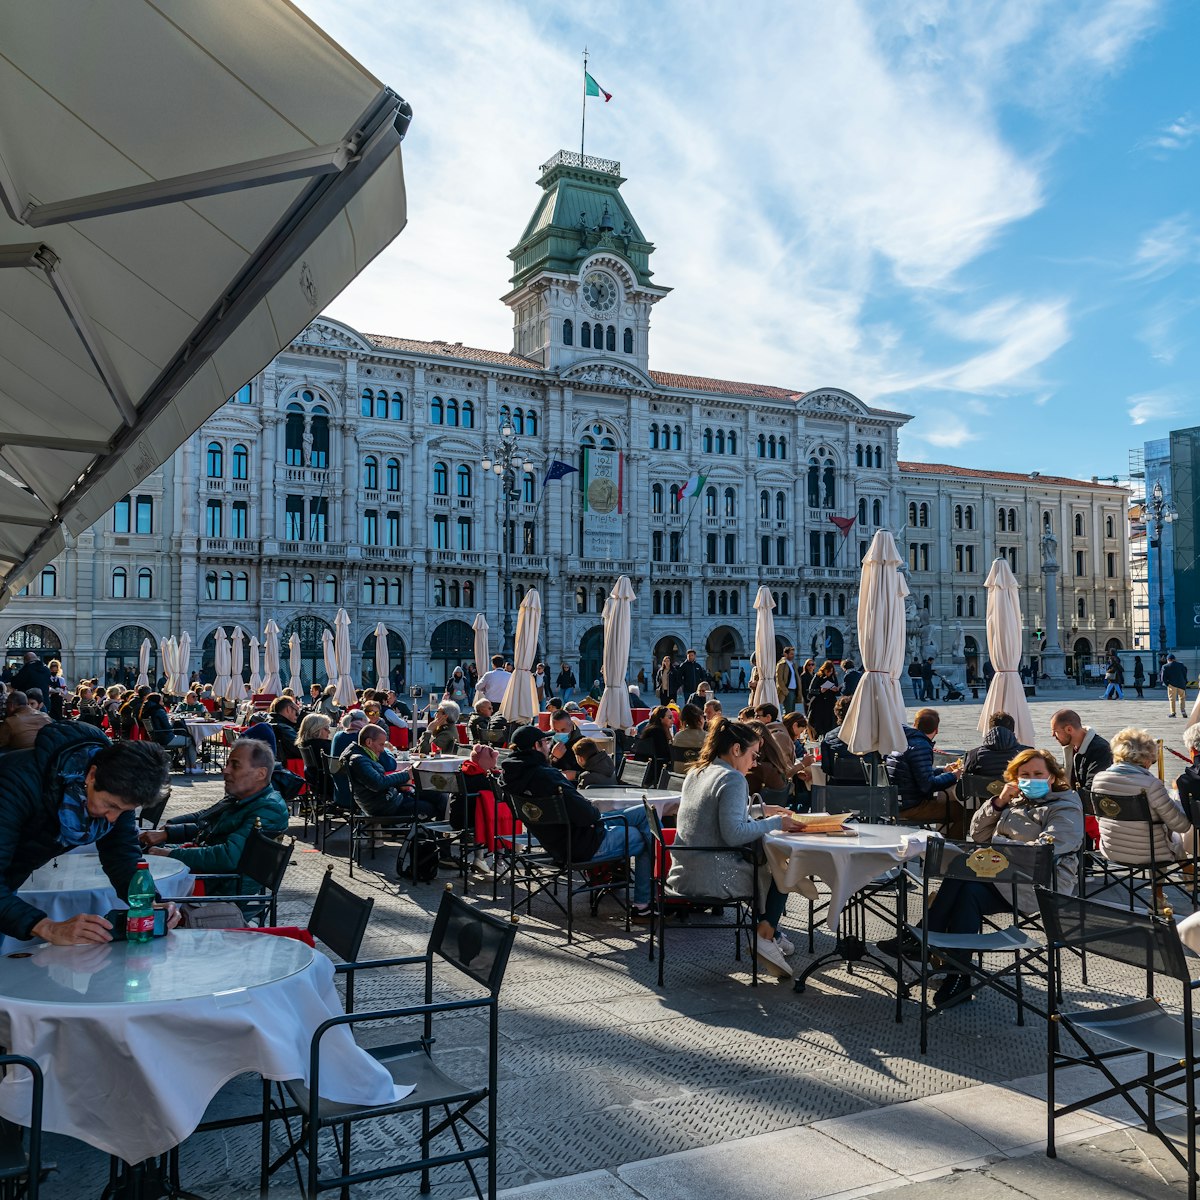 People enjoying coffee at a famous coffeeshop at the Piazza dell’Unità d’Italia, the main square in Trieste.